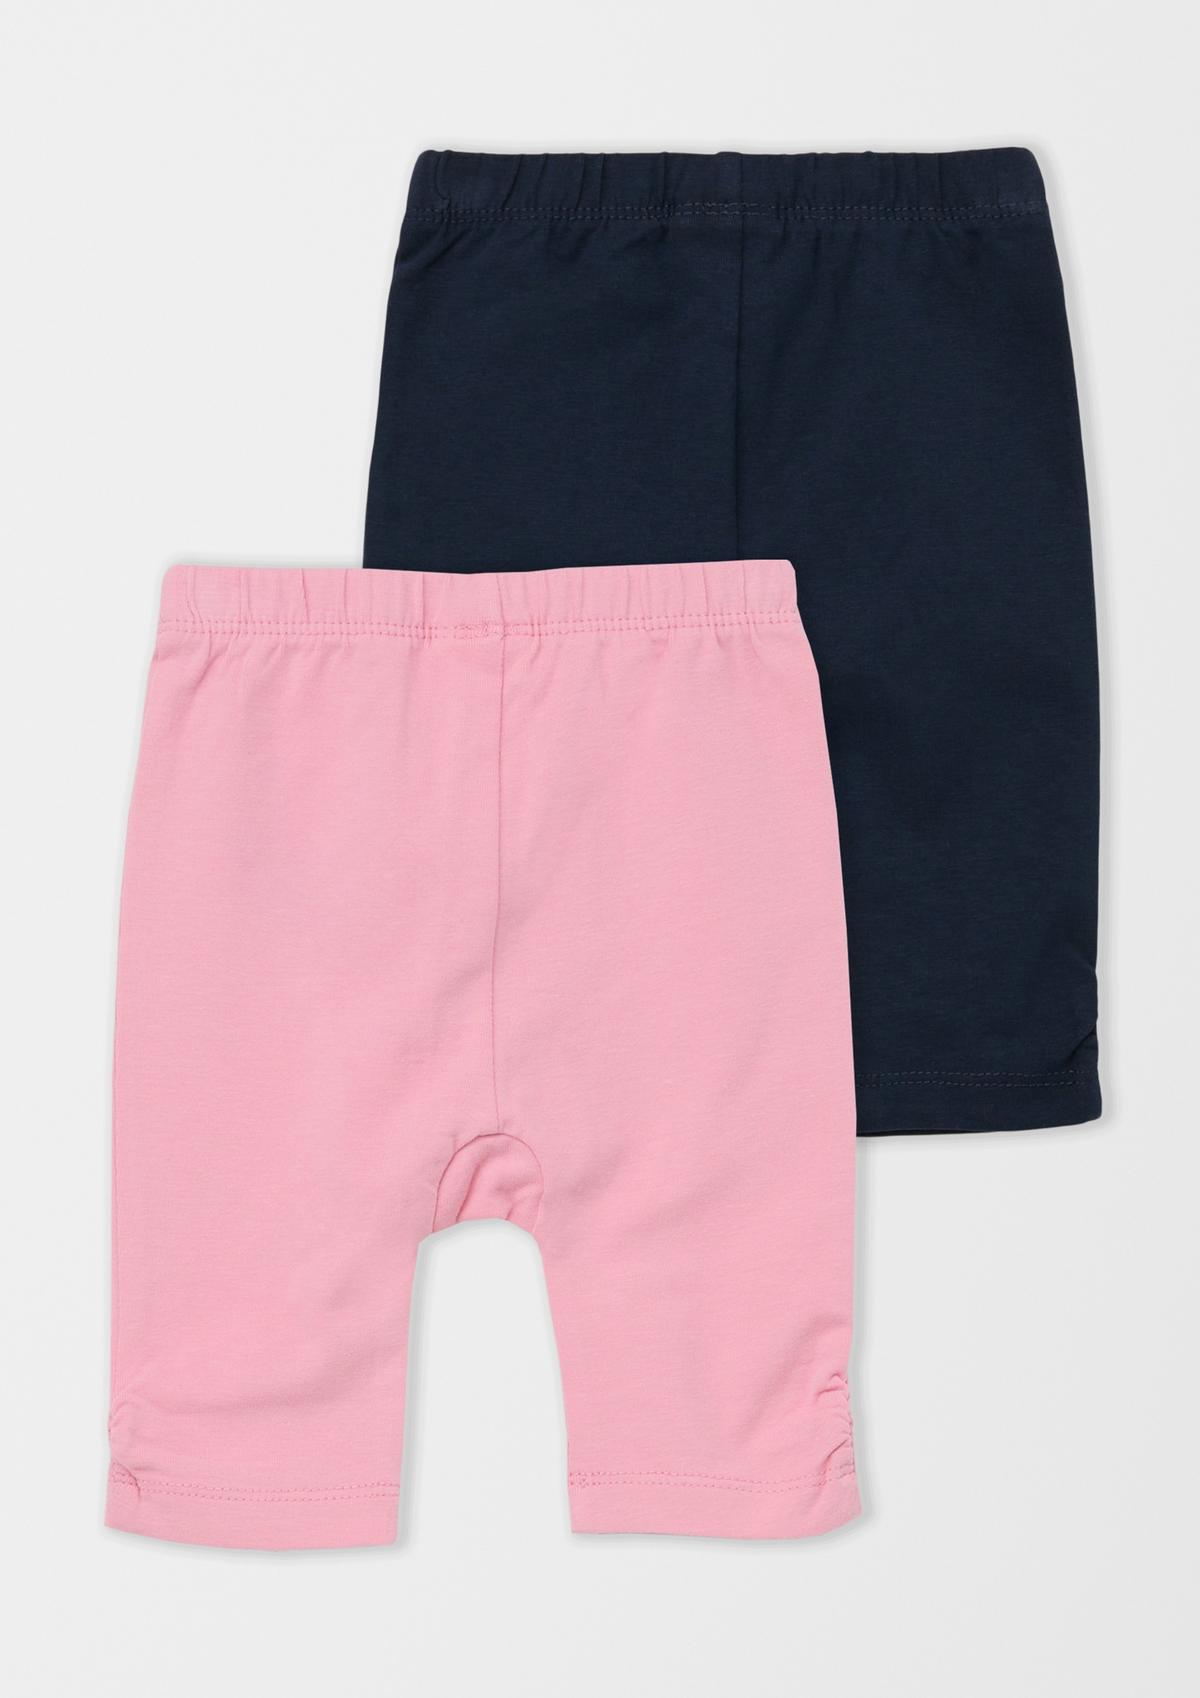 s.Oliver Leggings shorts in a double pack